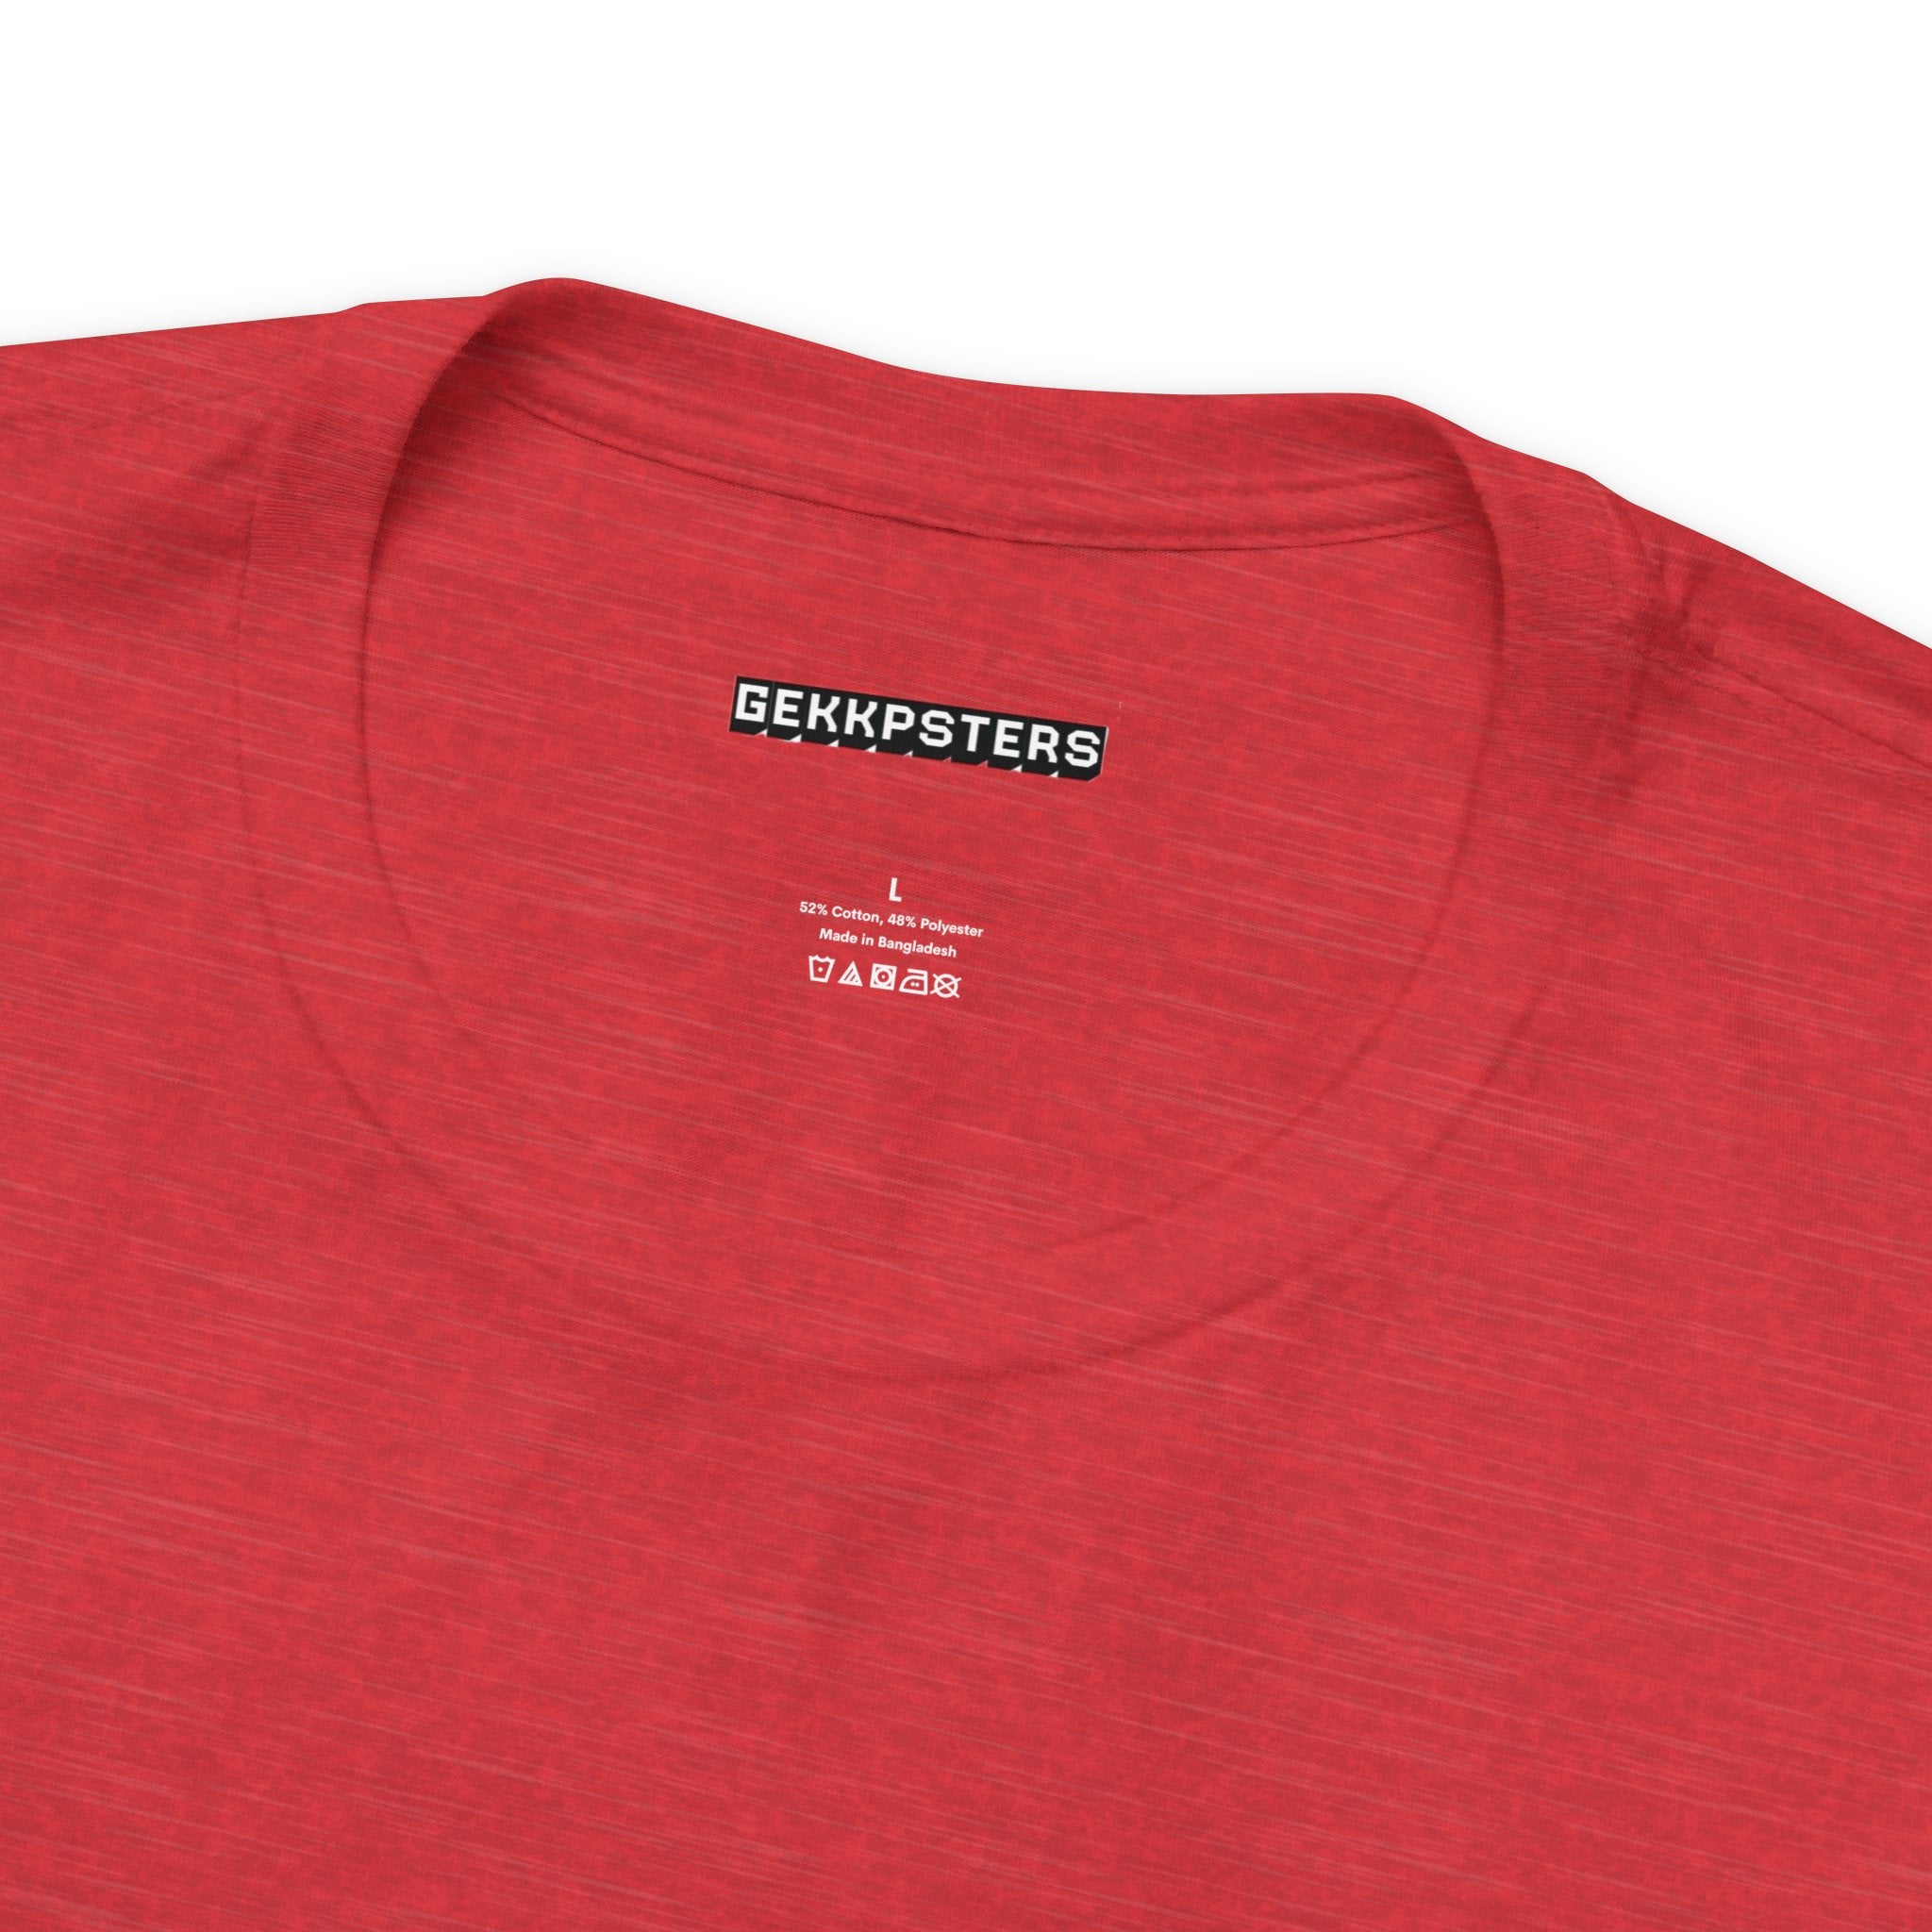 Red t-shirt with the word "Hello, I'm Dead Inside" printed on the inside collar, along with size 'l' and a quirky design product code below it.